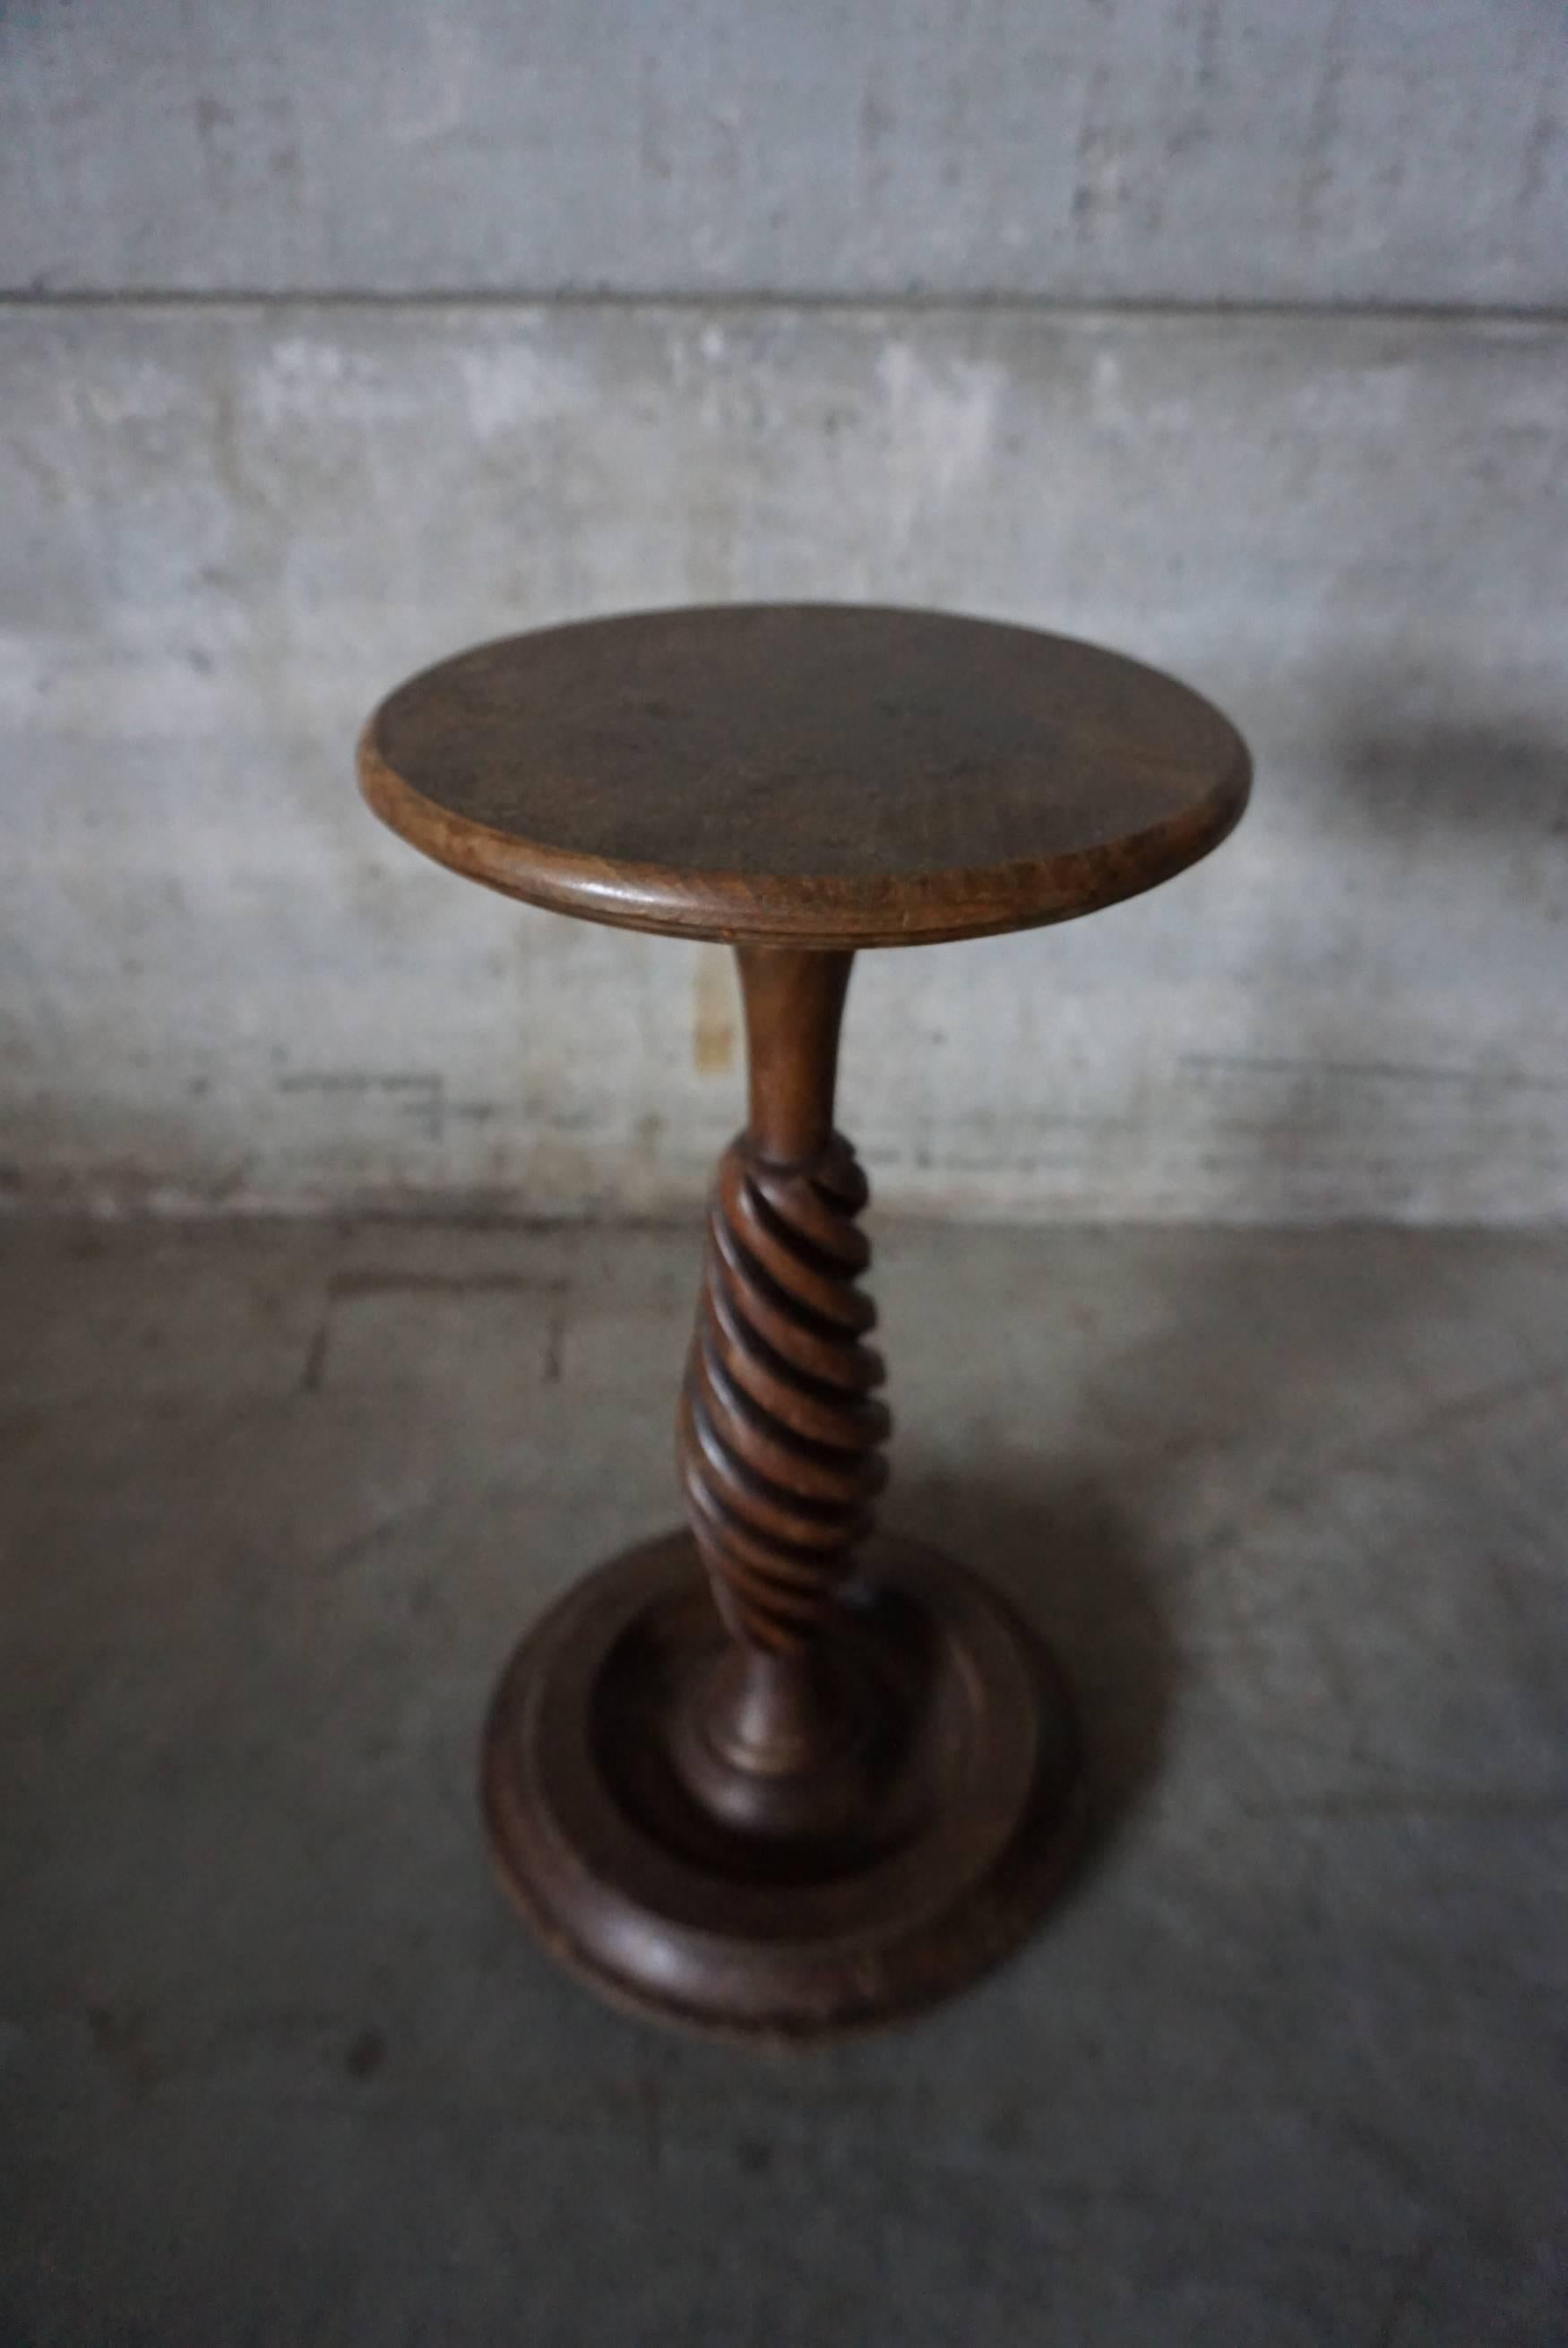 This antique oak pedestal was designed and made in the early 20th century in France. It features an oak top and base with a turned leg.